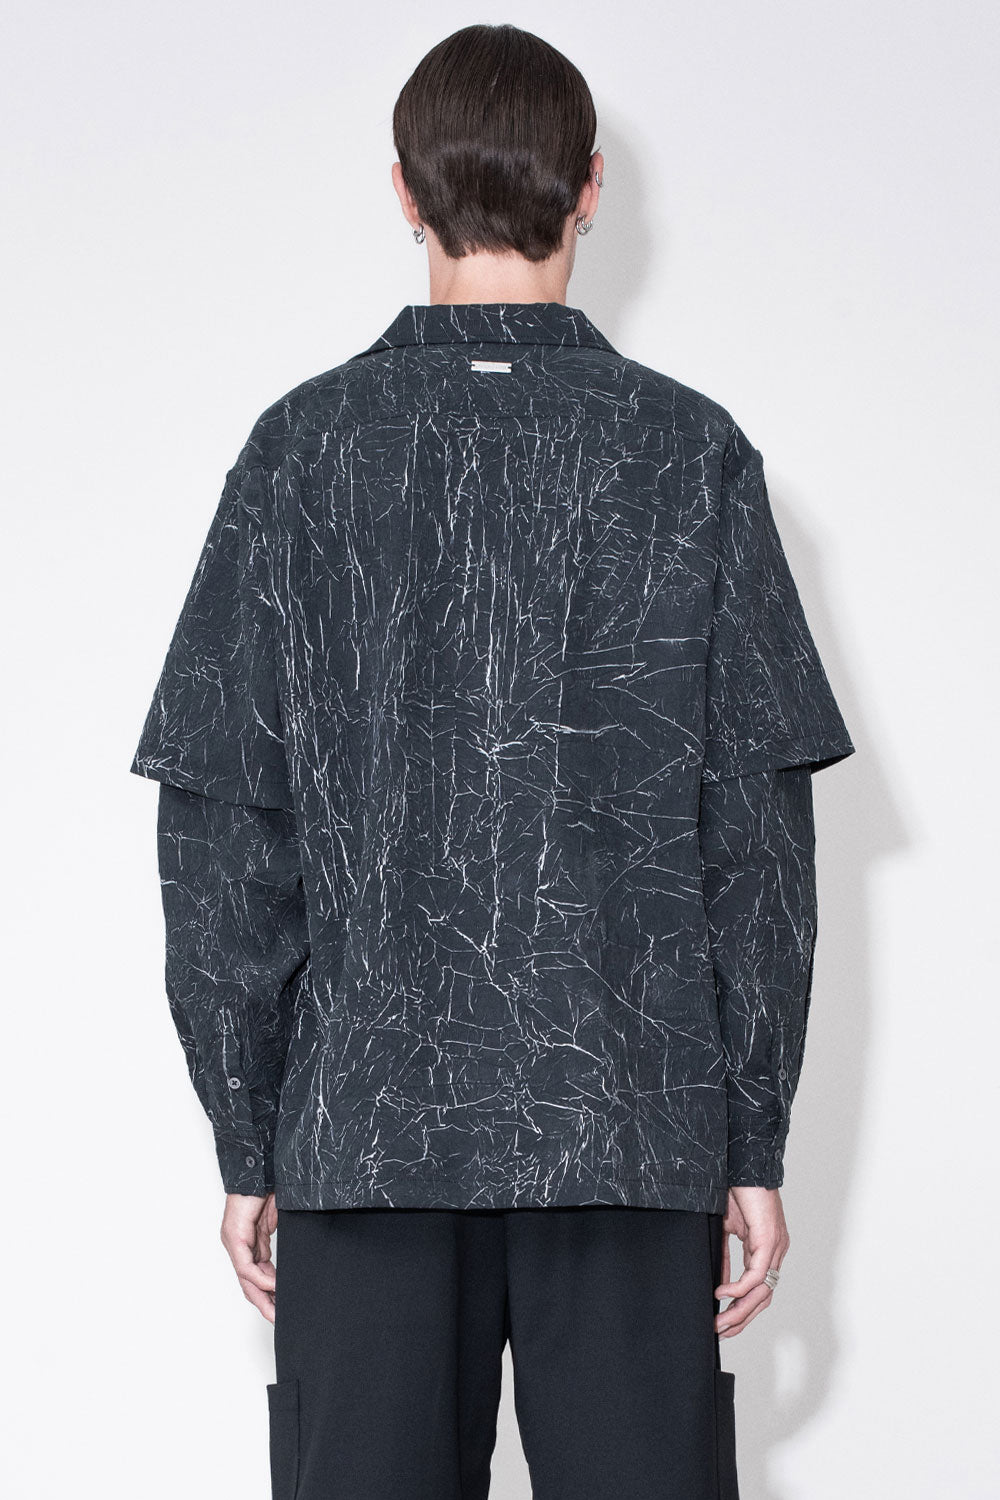 Buy the Han Kjobenhavn Wrinkle Two-Layered L/S Shirt in Black at Intro. Spend £50 for free UK delivery. Official stockists. We ship worldwide.